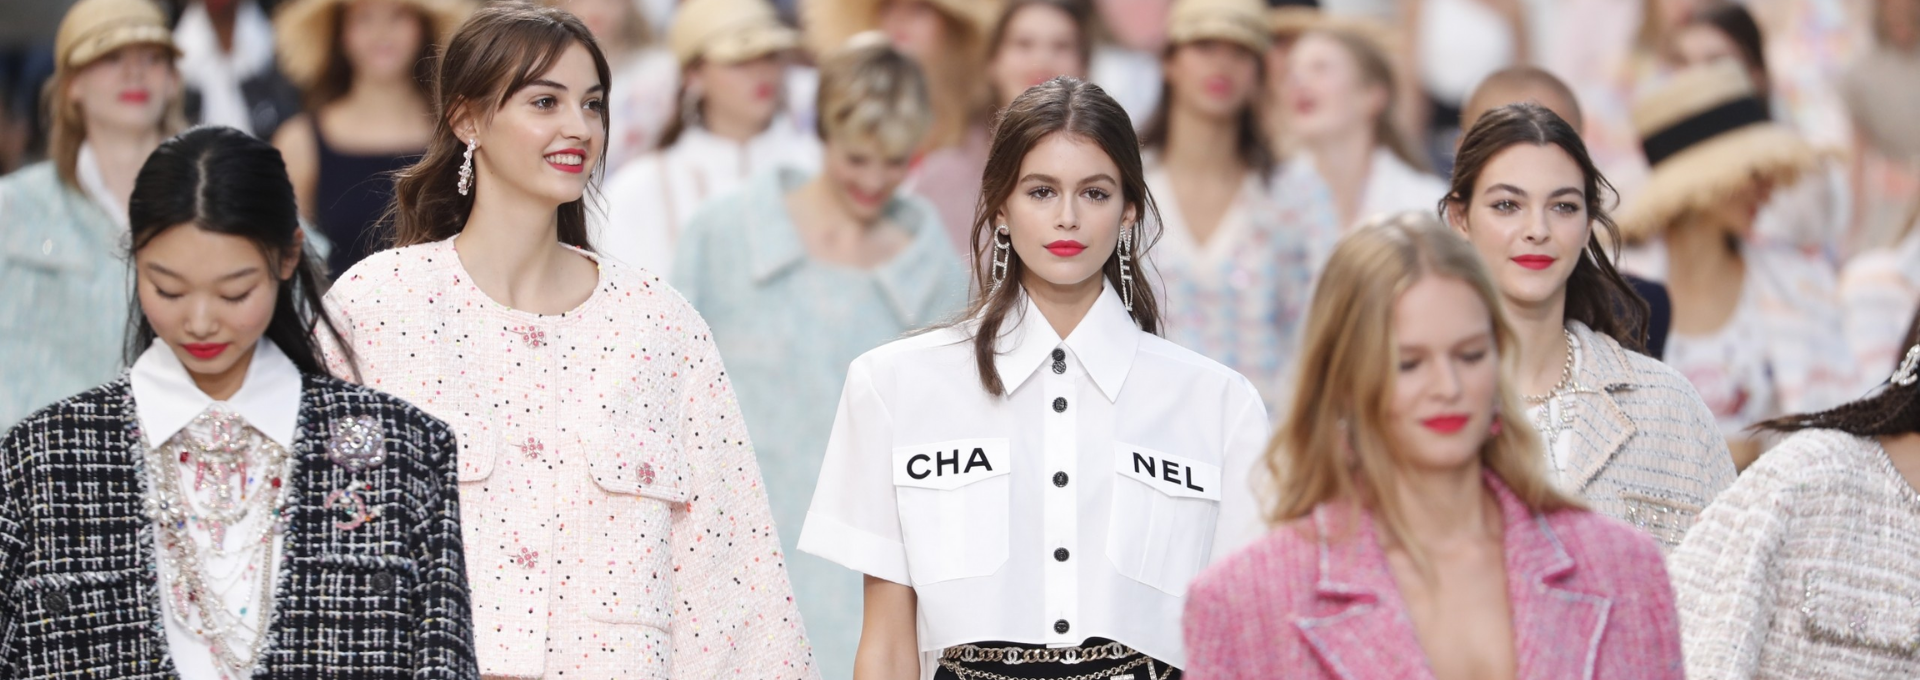 Luxury brands return to live show format at Paris Fashion Week – Daily